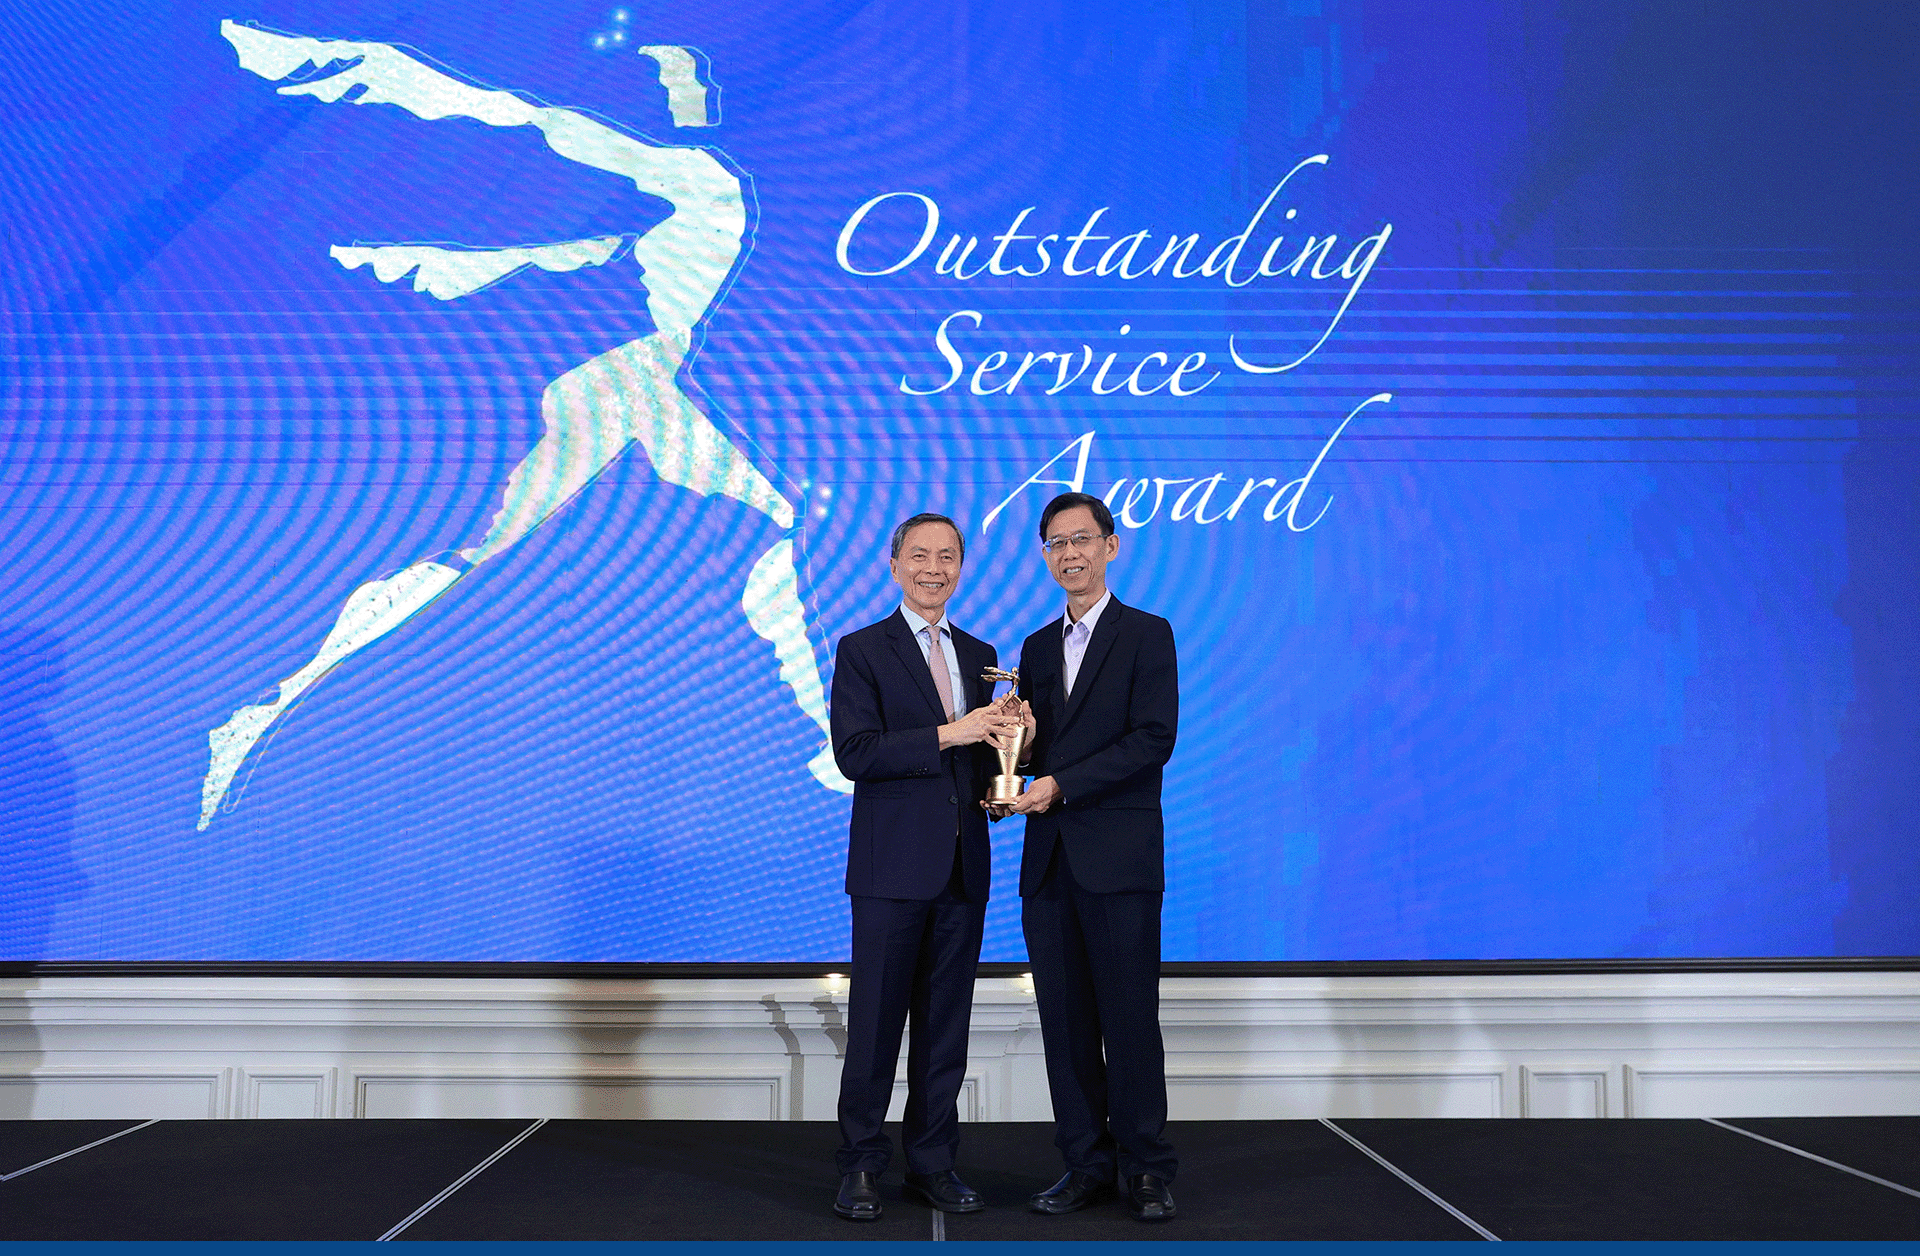 Mr Quek Gim Pew (right) pictured at the award ceremony with NUS Chairman Mr Hsieh Fu Hua.